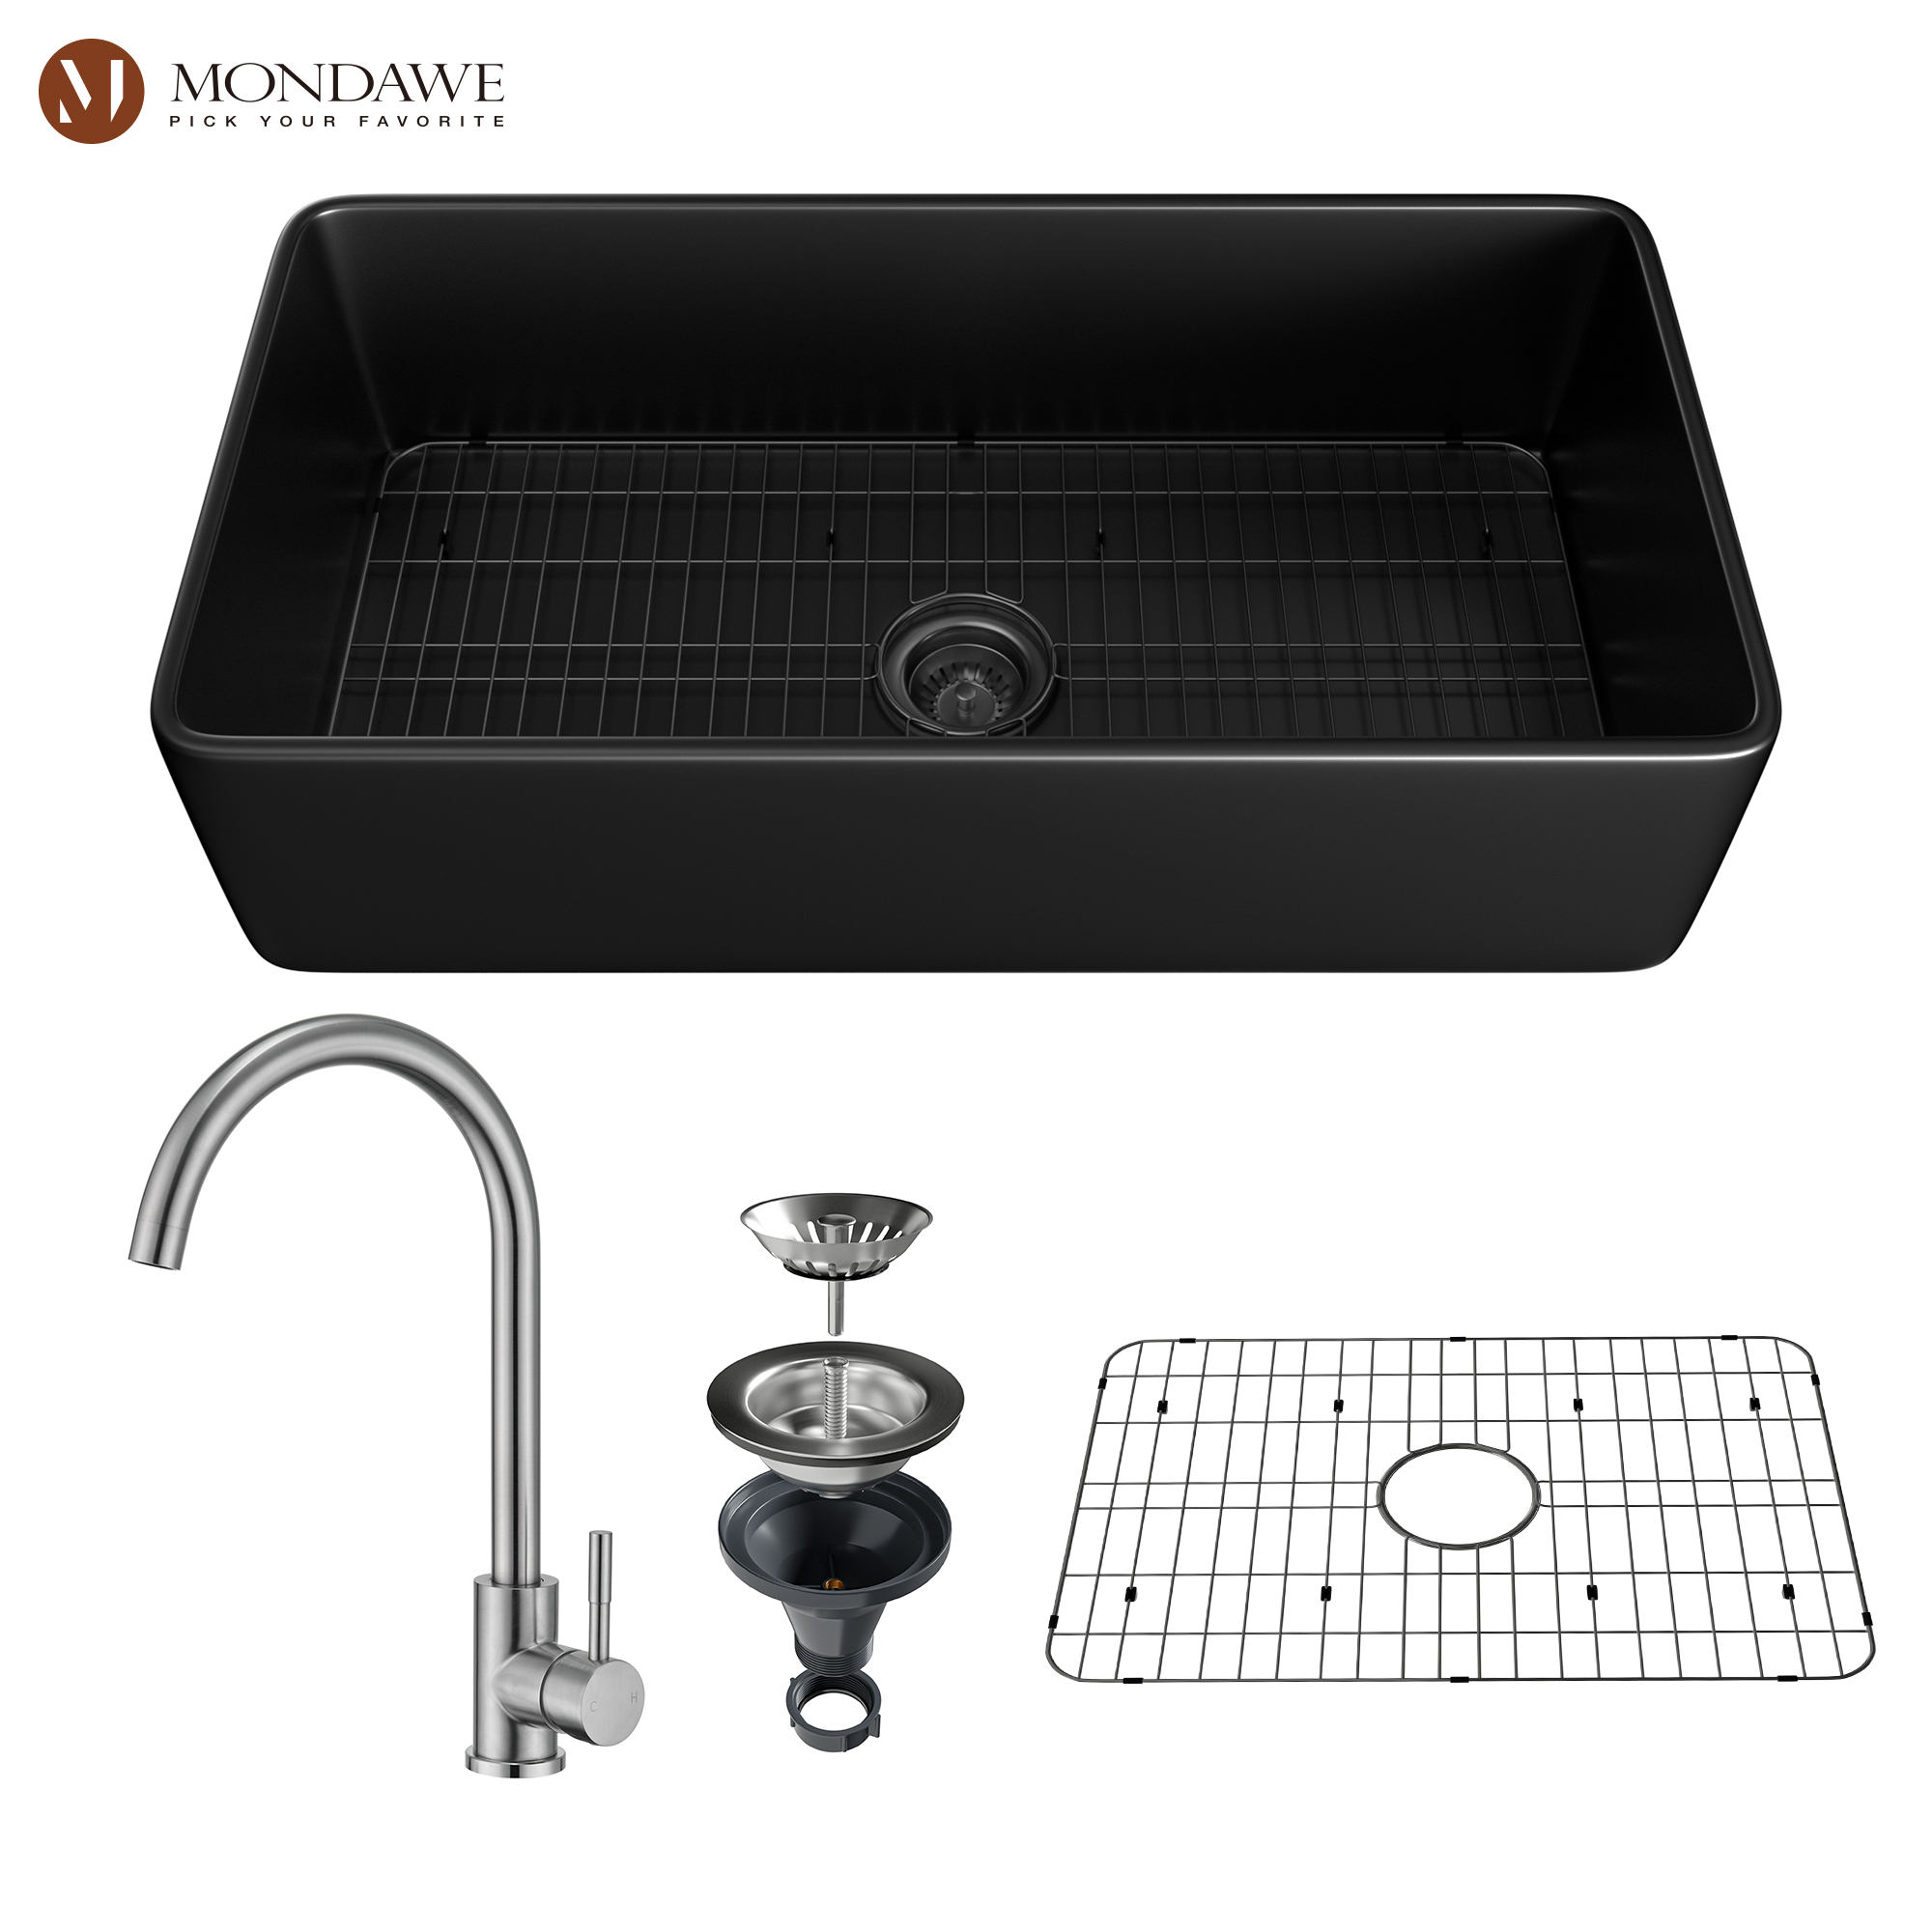 Farmhouse 36 in. single bowl fireclay kitchen sink comes with high-arc kitchen faucet-Mondawe